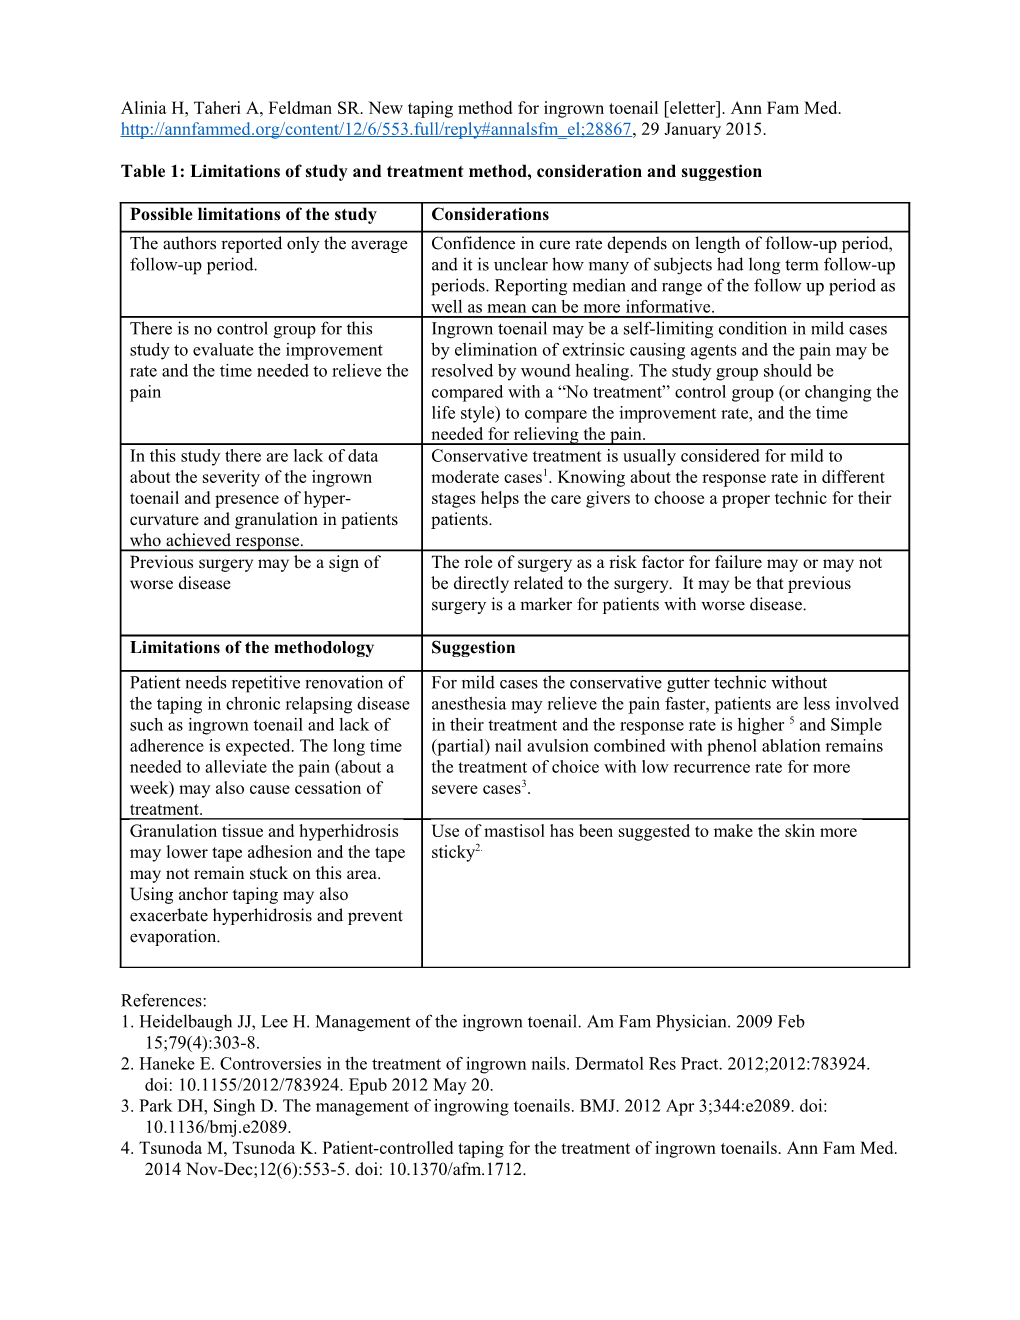 Table 1: Limitations of Study and Treatment Method, Consideration and Suggestion